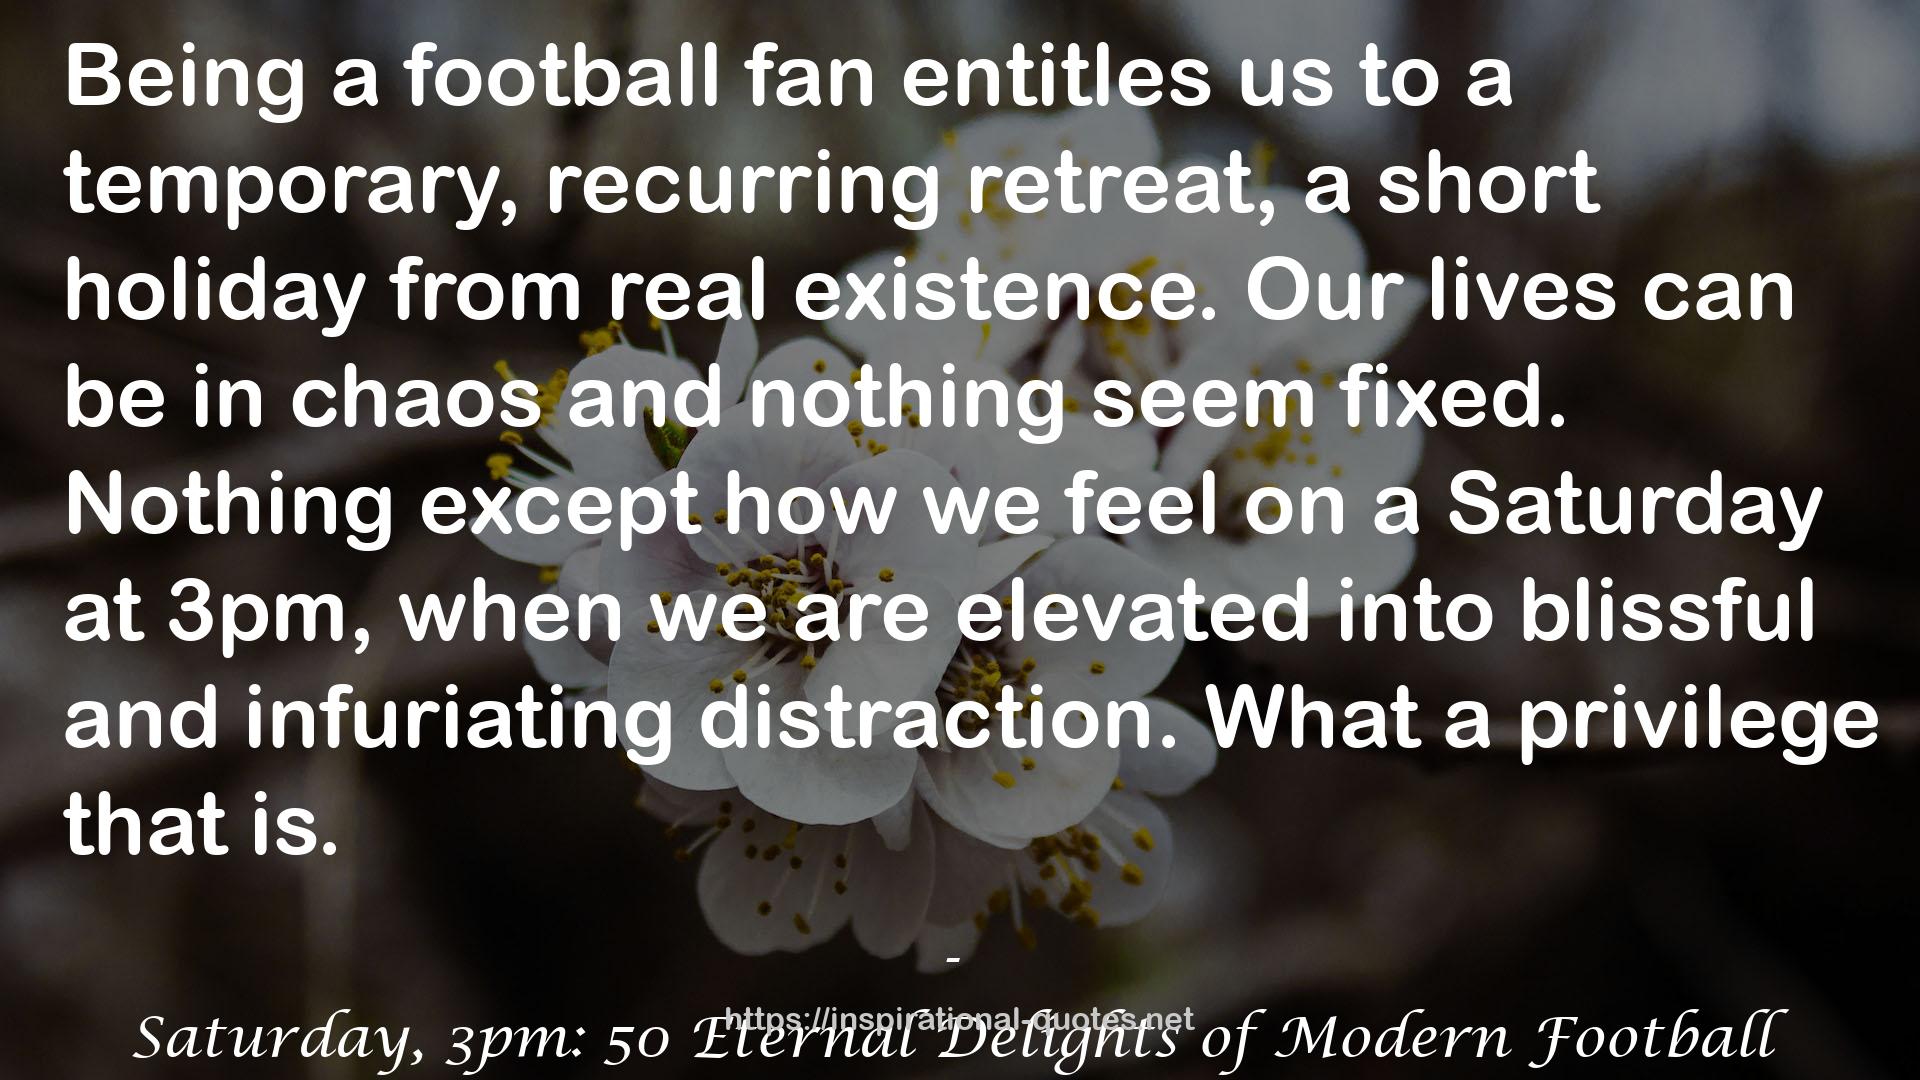 Saturday, 3pm: 50 Eternal Delights of Modern Football QUOTES